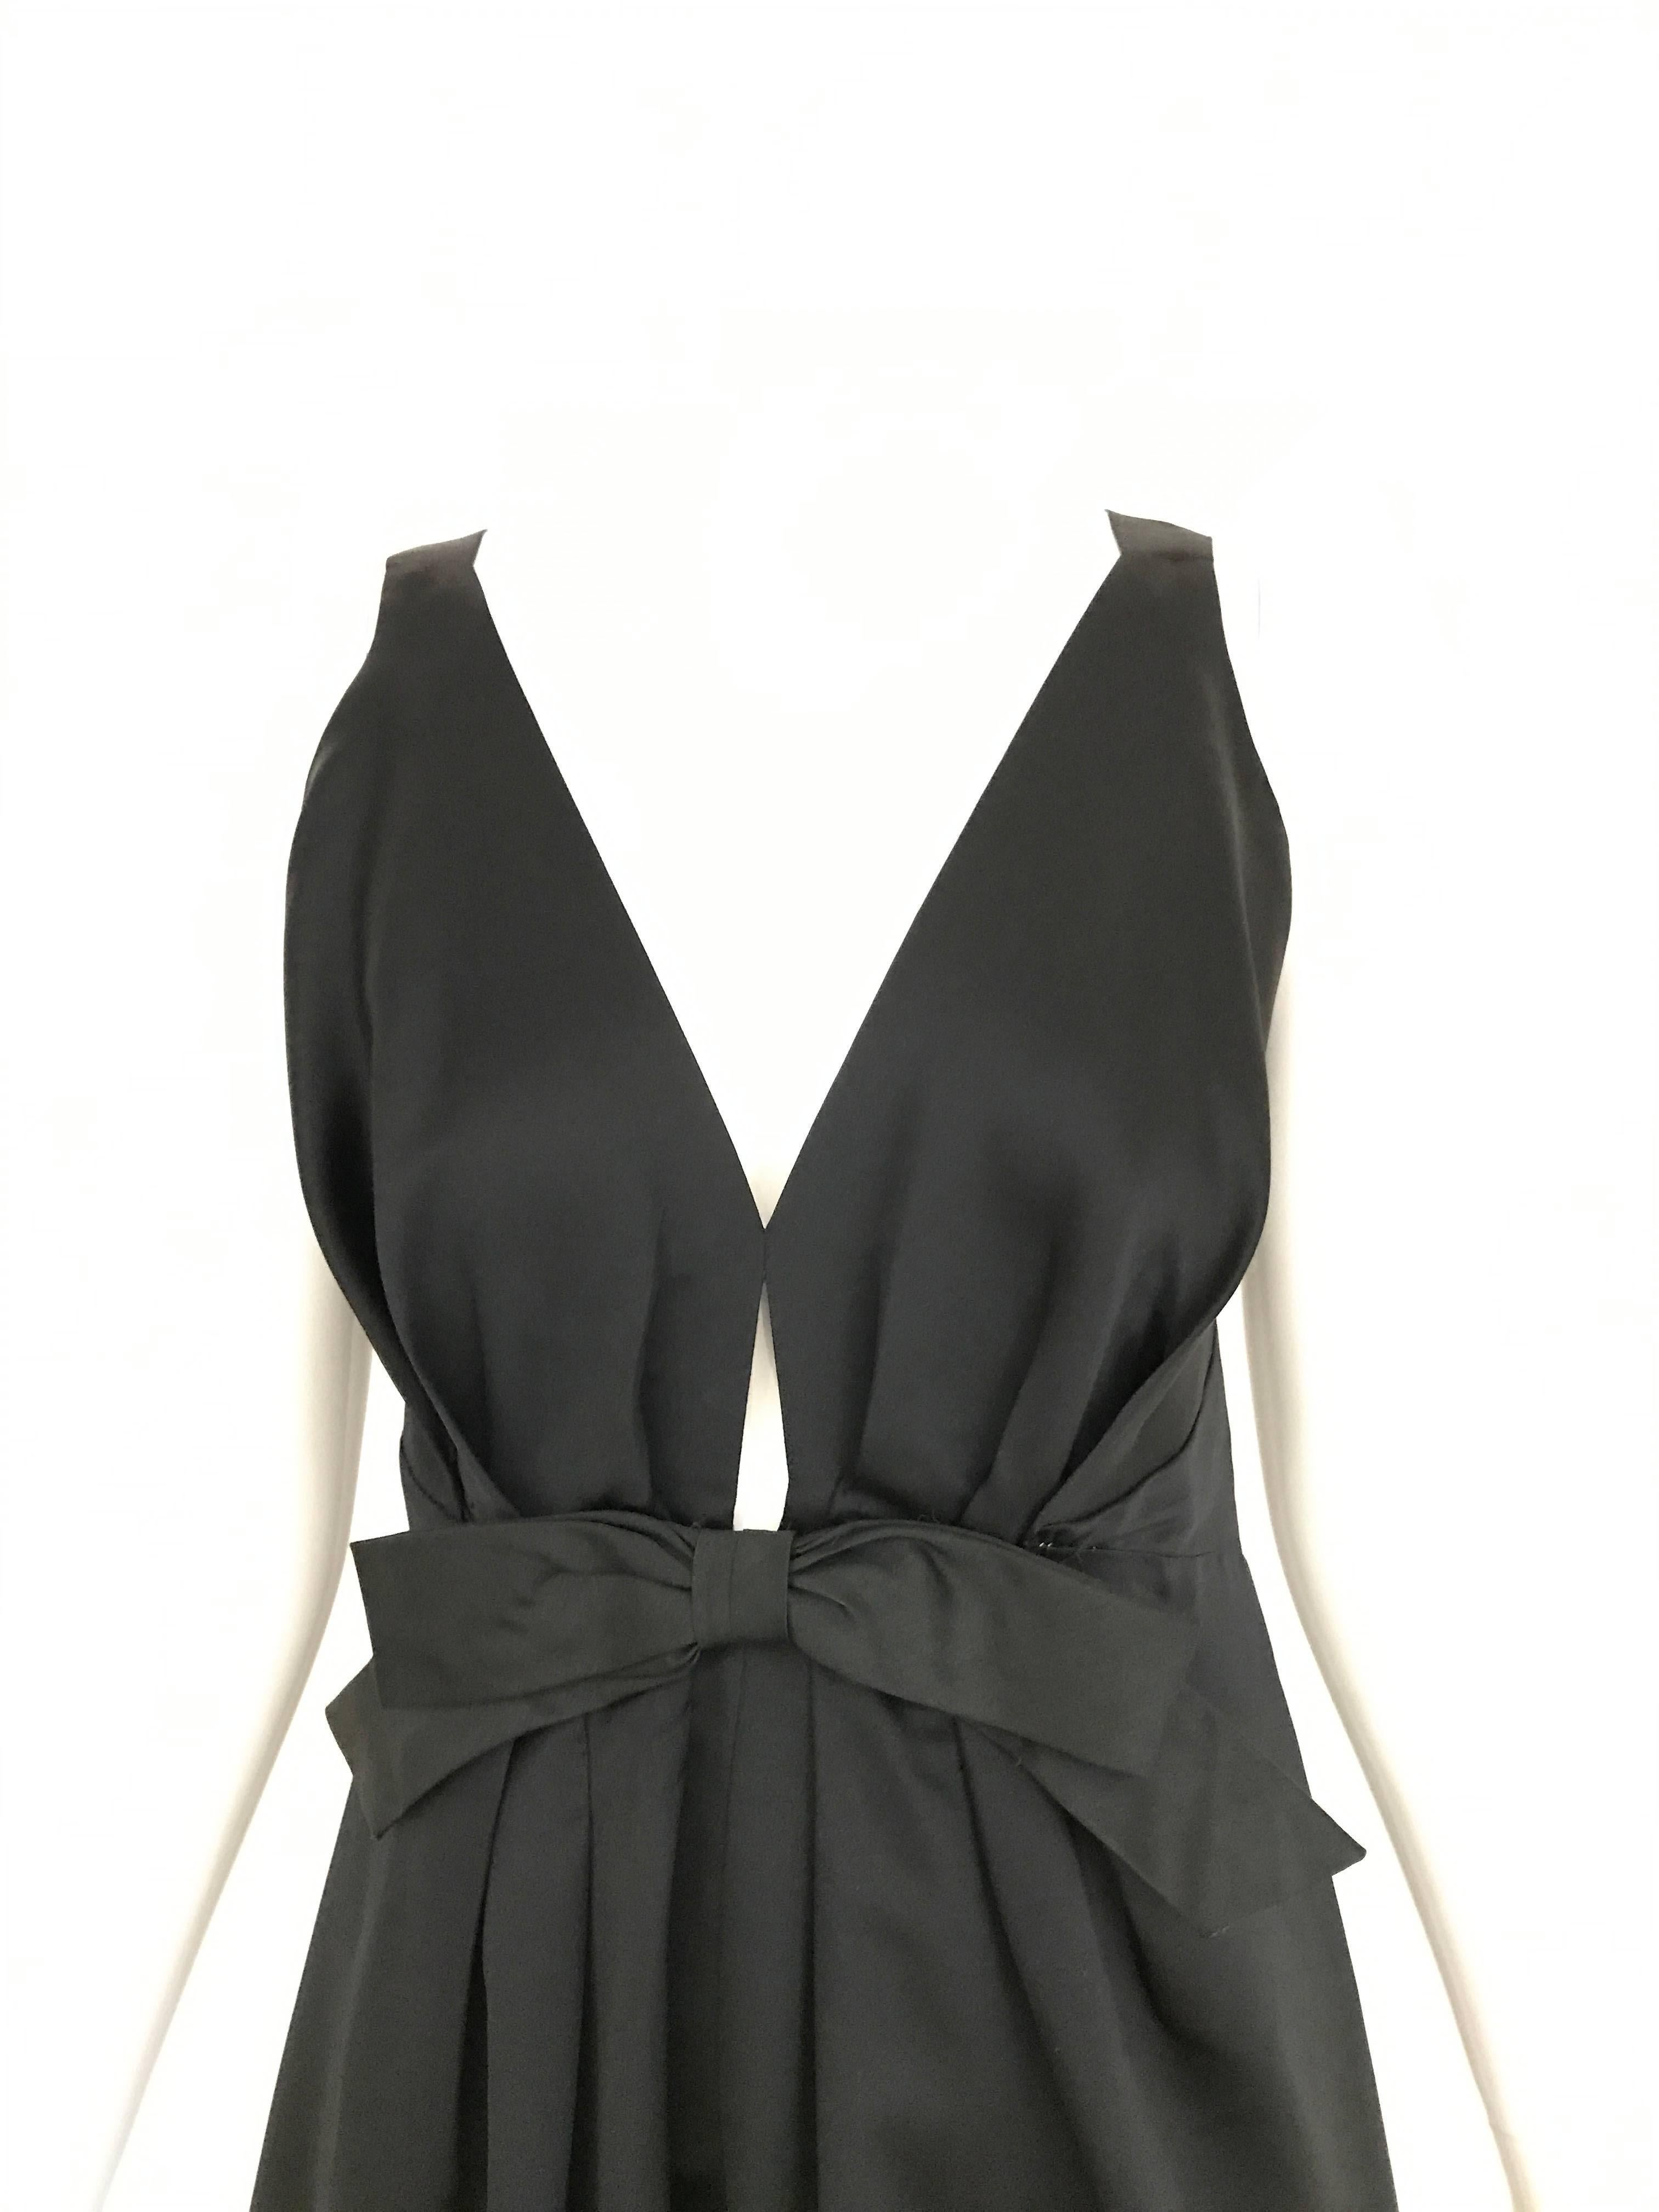 Vintage 1960s Adelle Ross Sleeveless Black Silk Gown with V neck and small bow.  Size: 6

**** This Garment has been professionally Dry Cleaned and Ready to wear.
